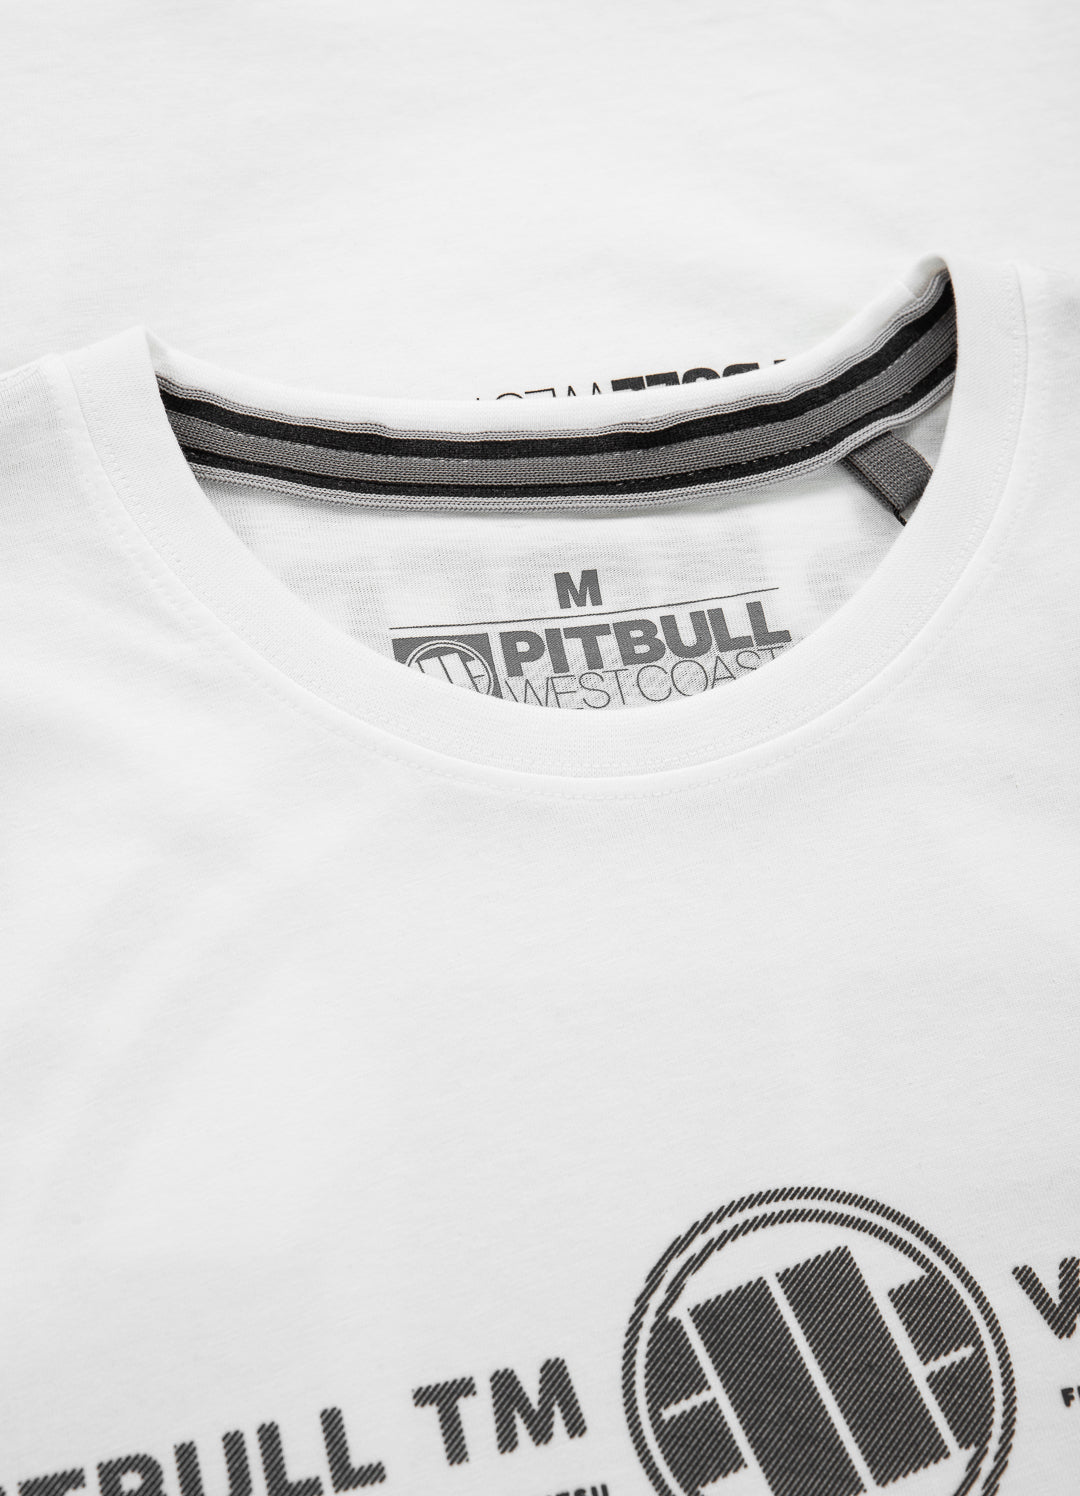 KEEP ROLLING White T-shirt.